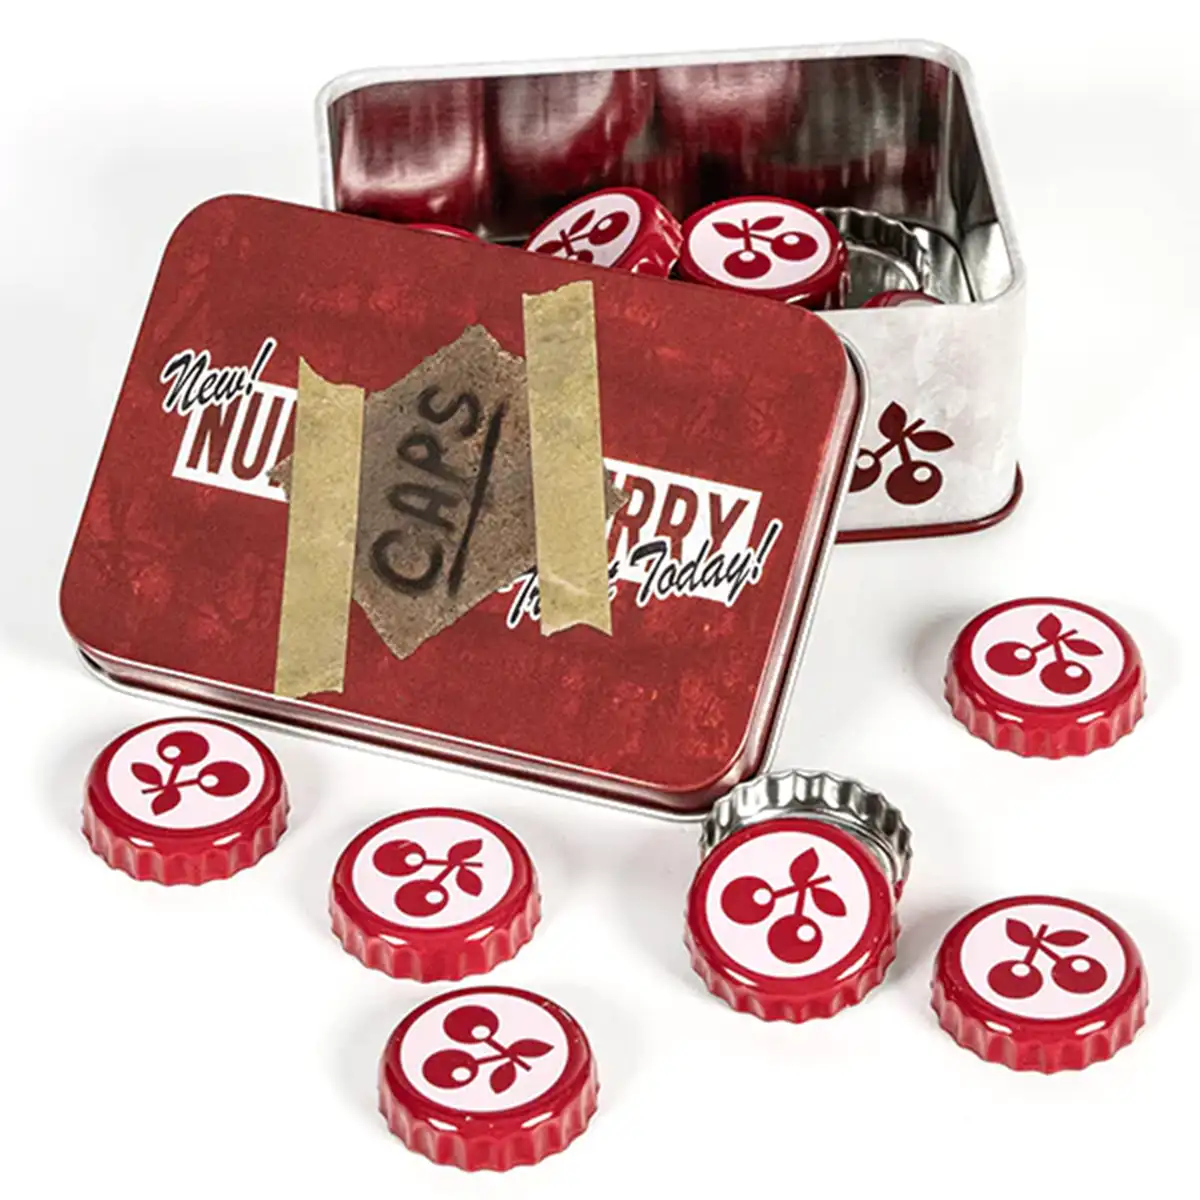 Fallout Bottle Cap Series "Nuka Cola Cherry" with Collection Tin Image 4